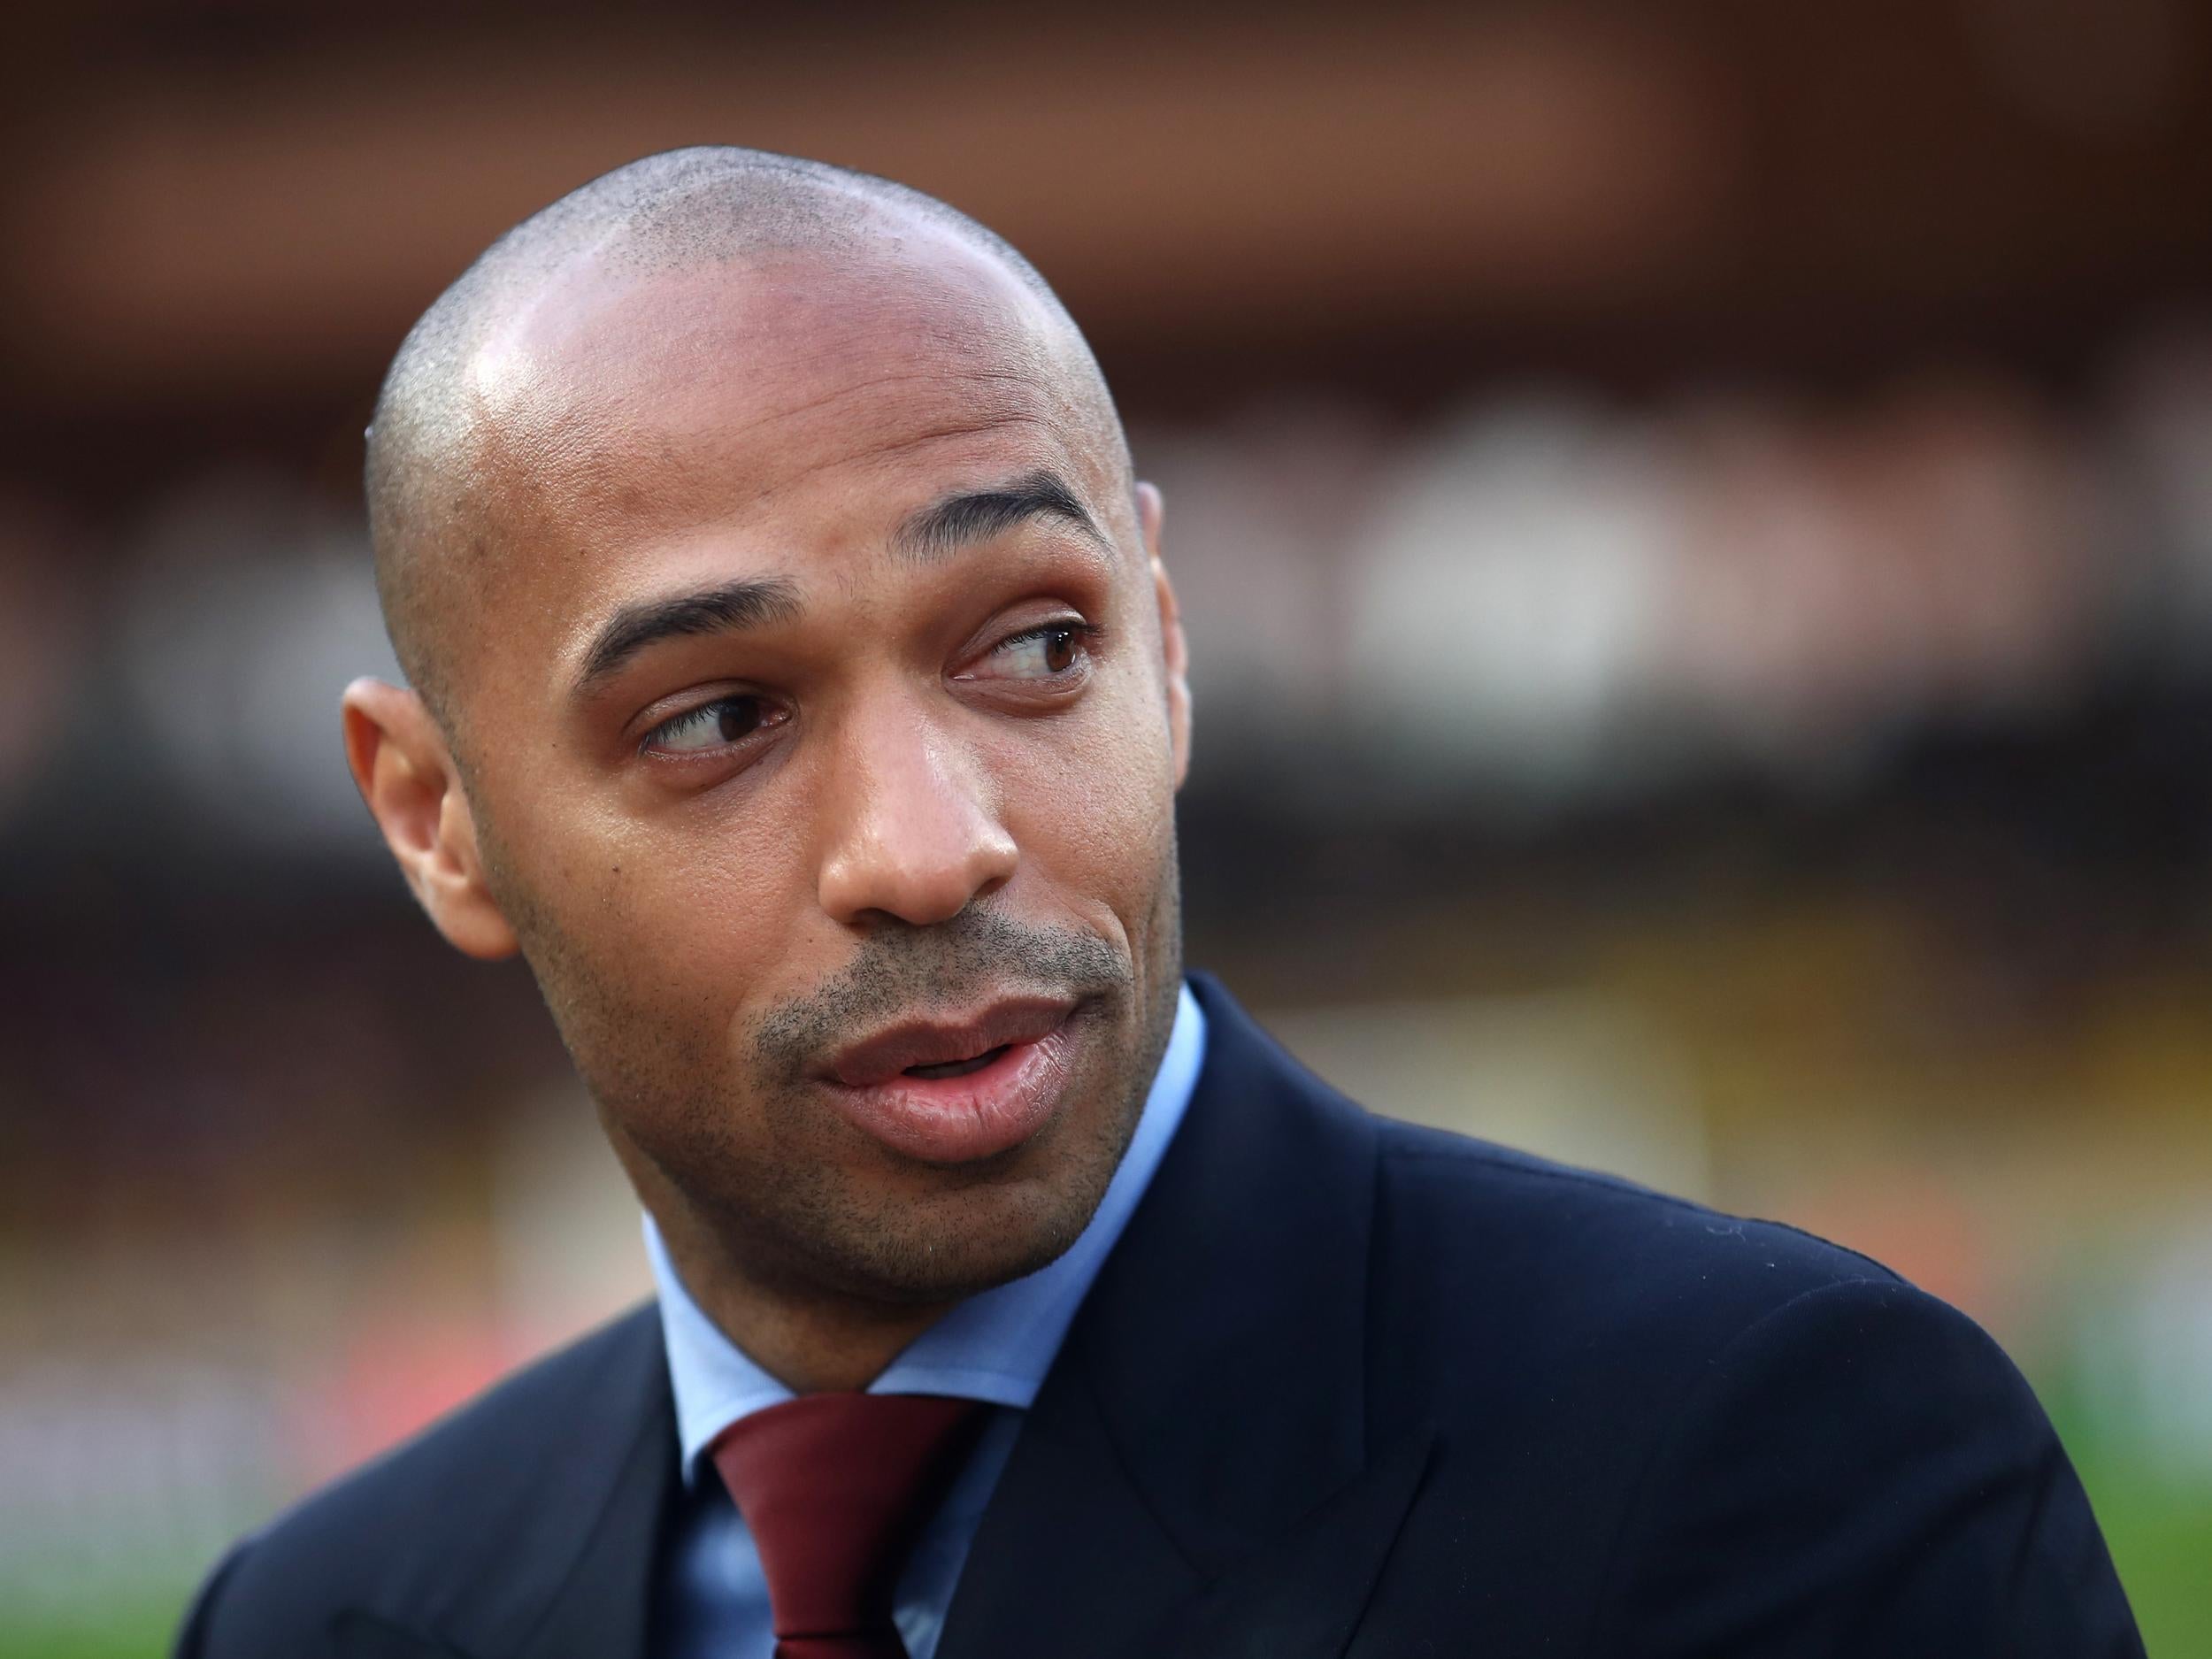 Thierry Henry believes there is only one 'world class' striker in